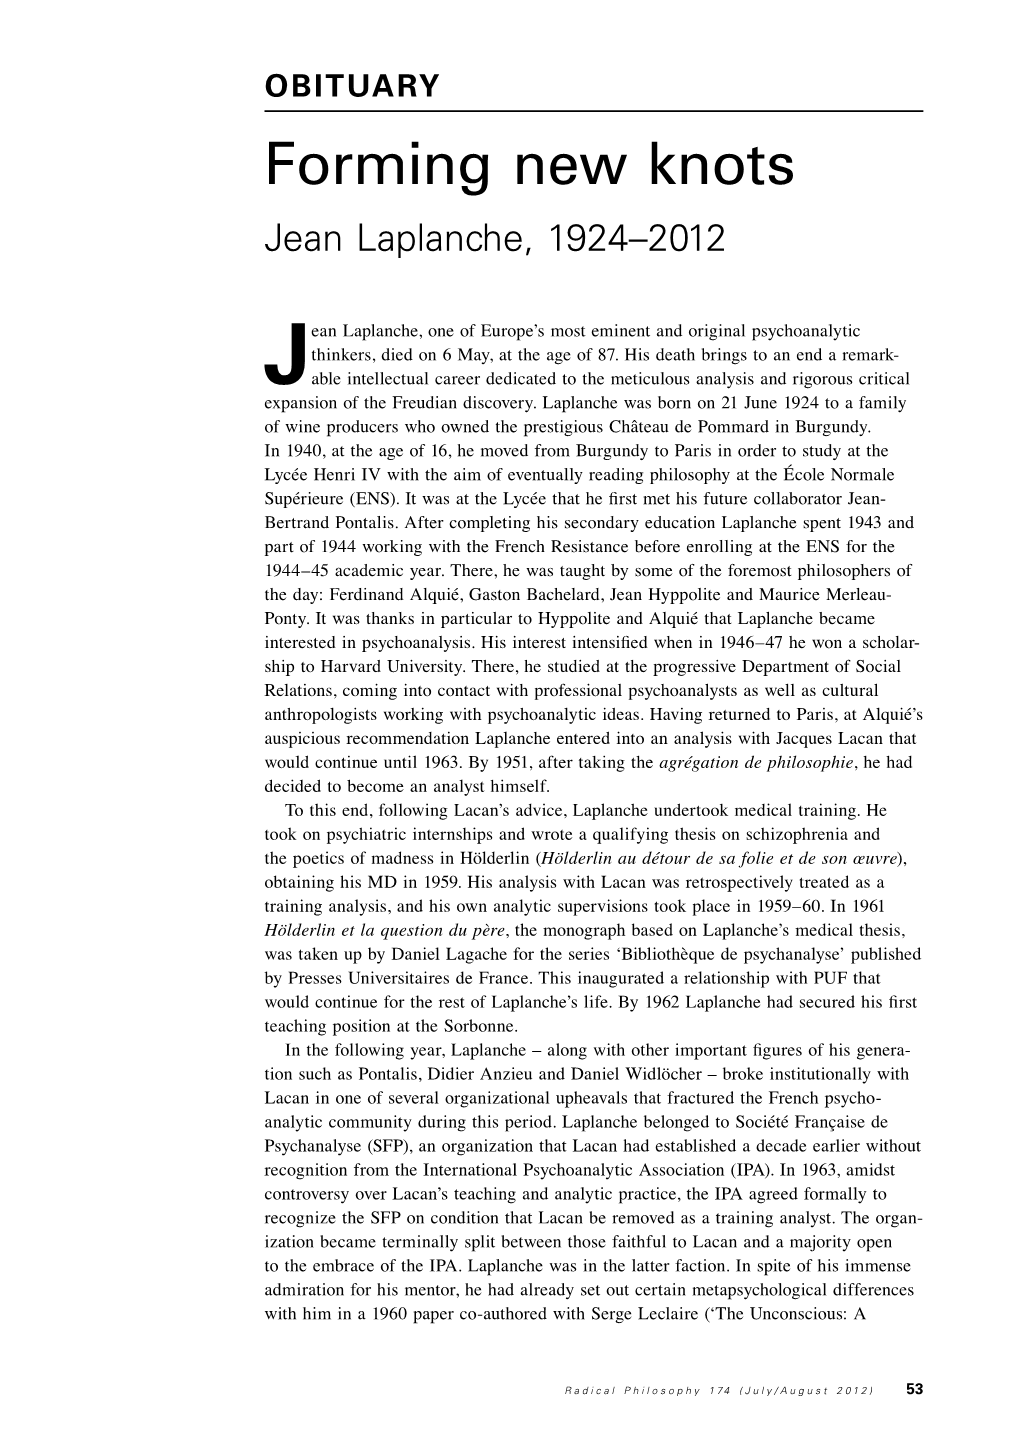 Forming New Knots: Jean Laplanche 1924-2012